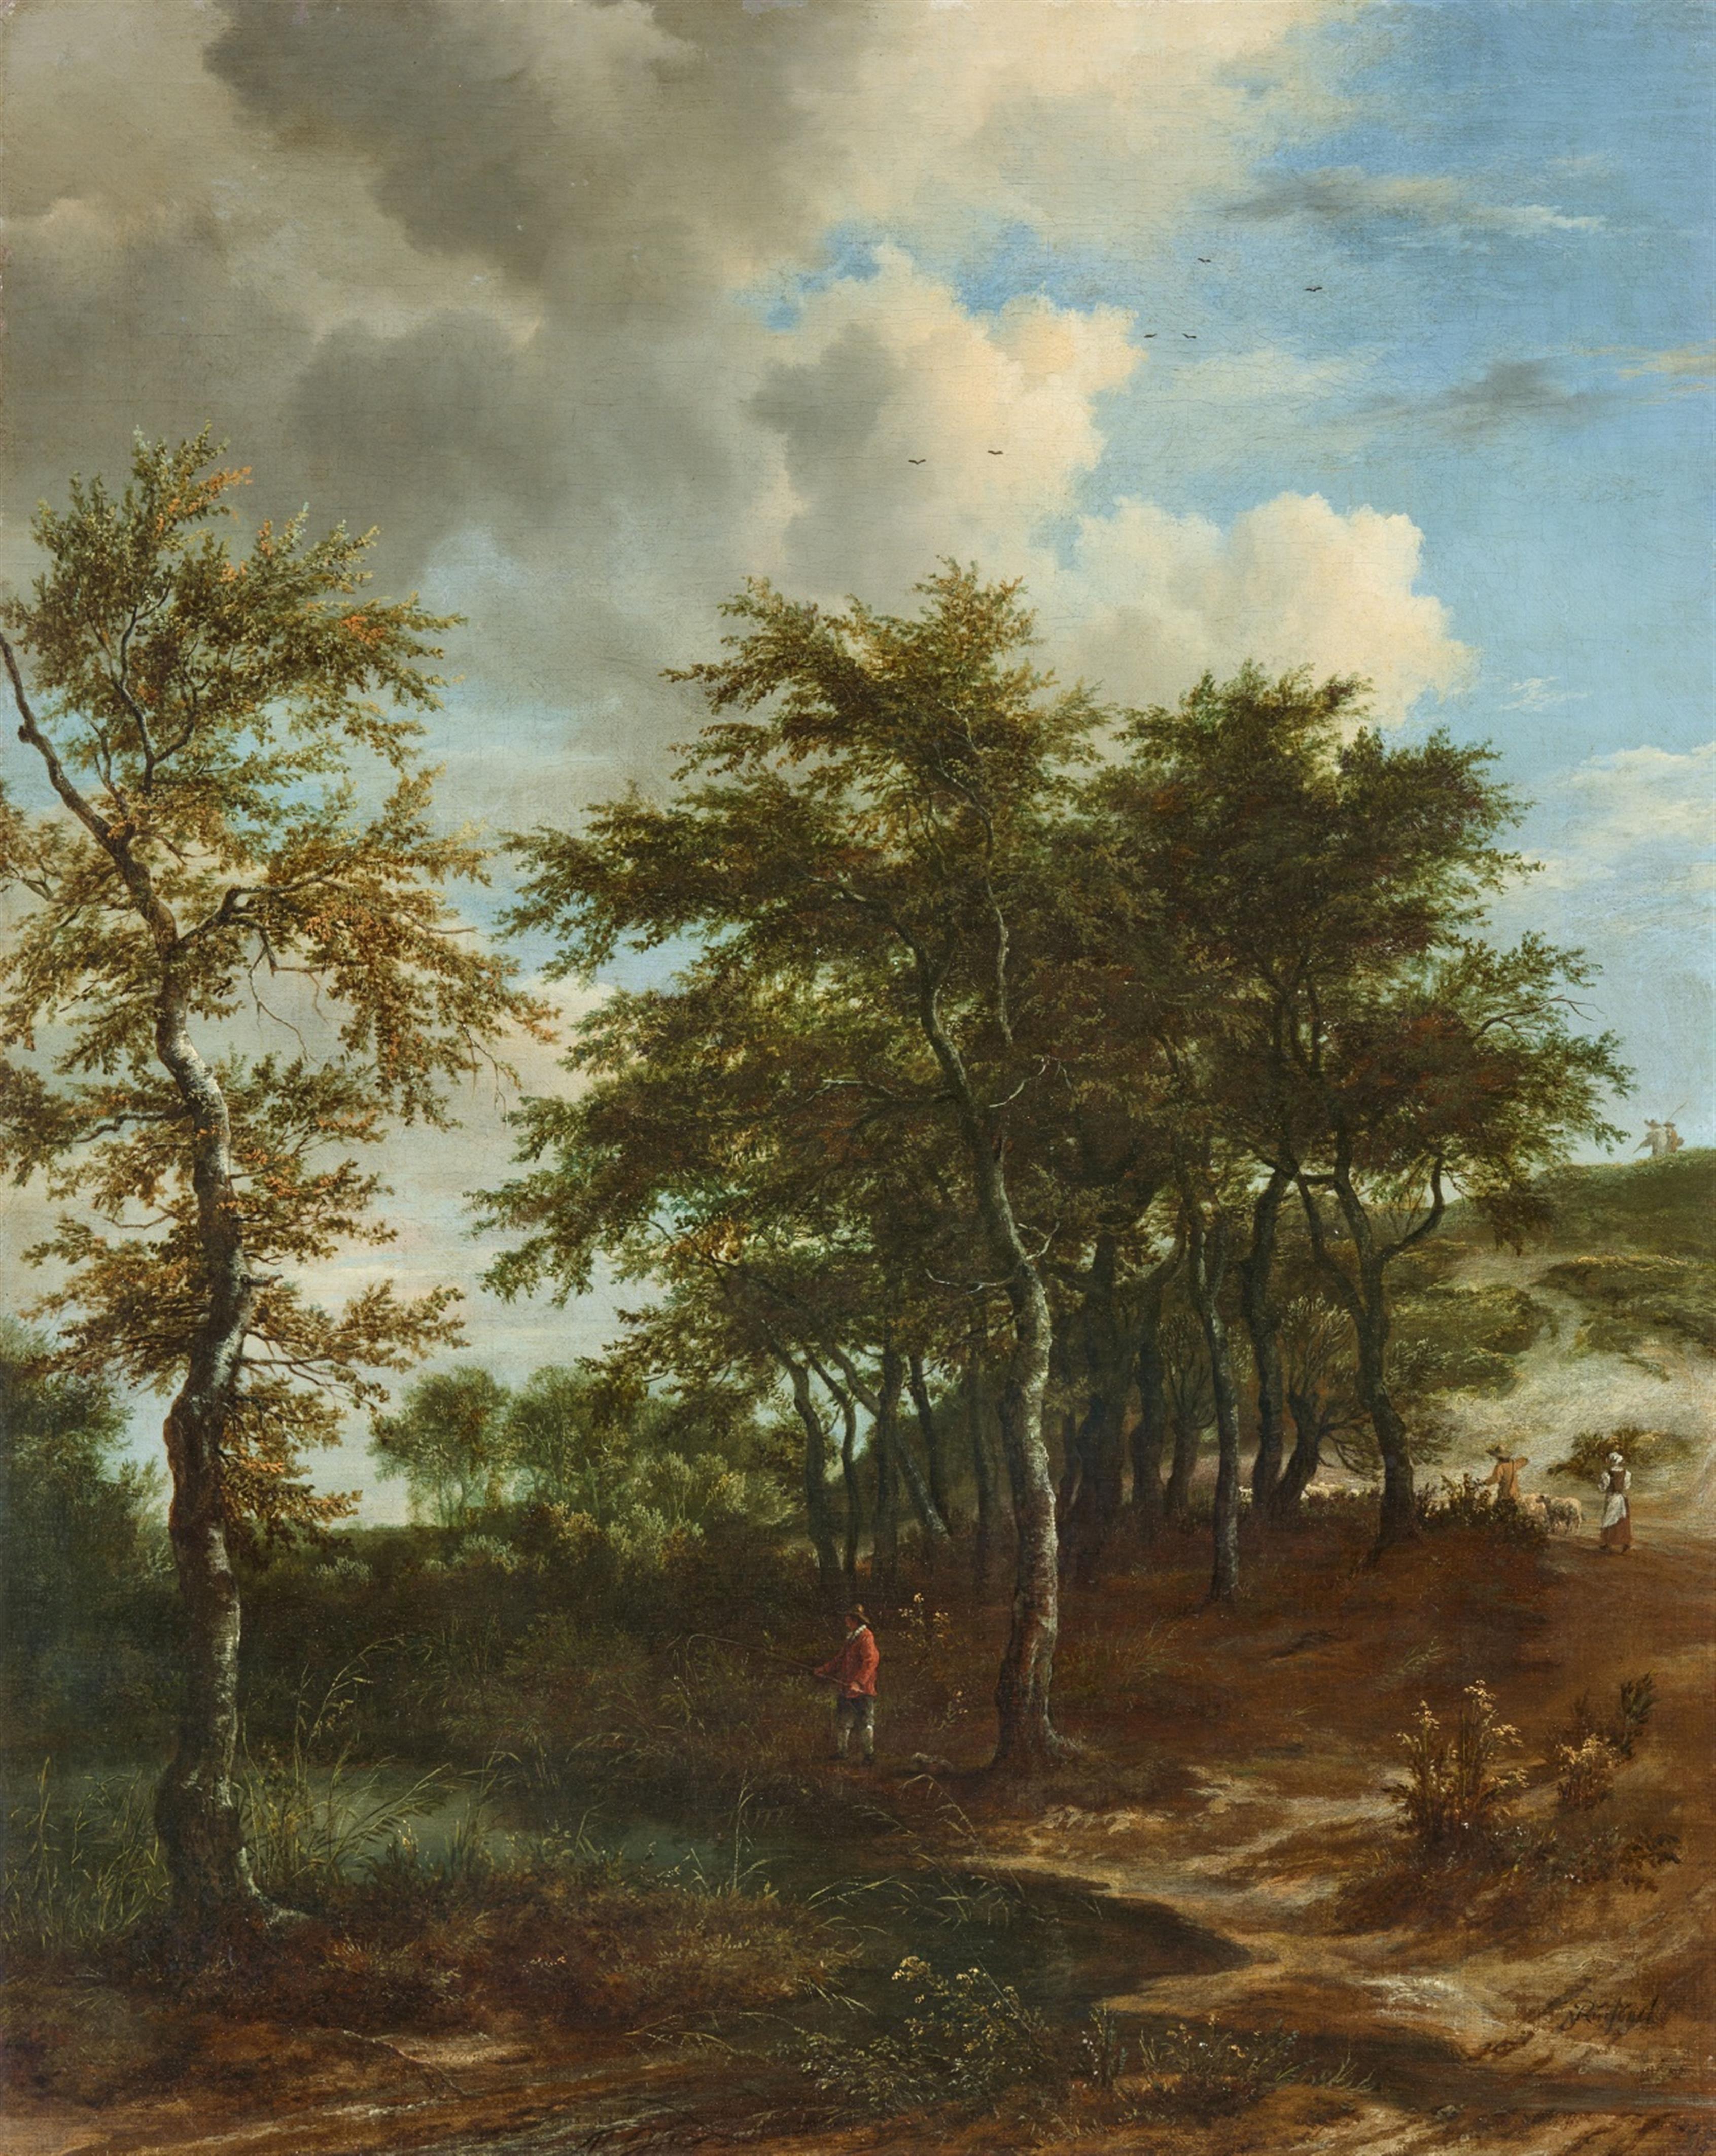 Jacob van Ruisdael - Landscape with Tall Trees, a Fisherman, and Shepherds - image-1